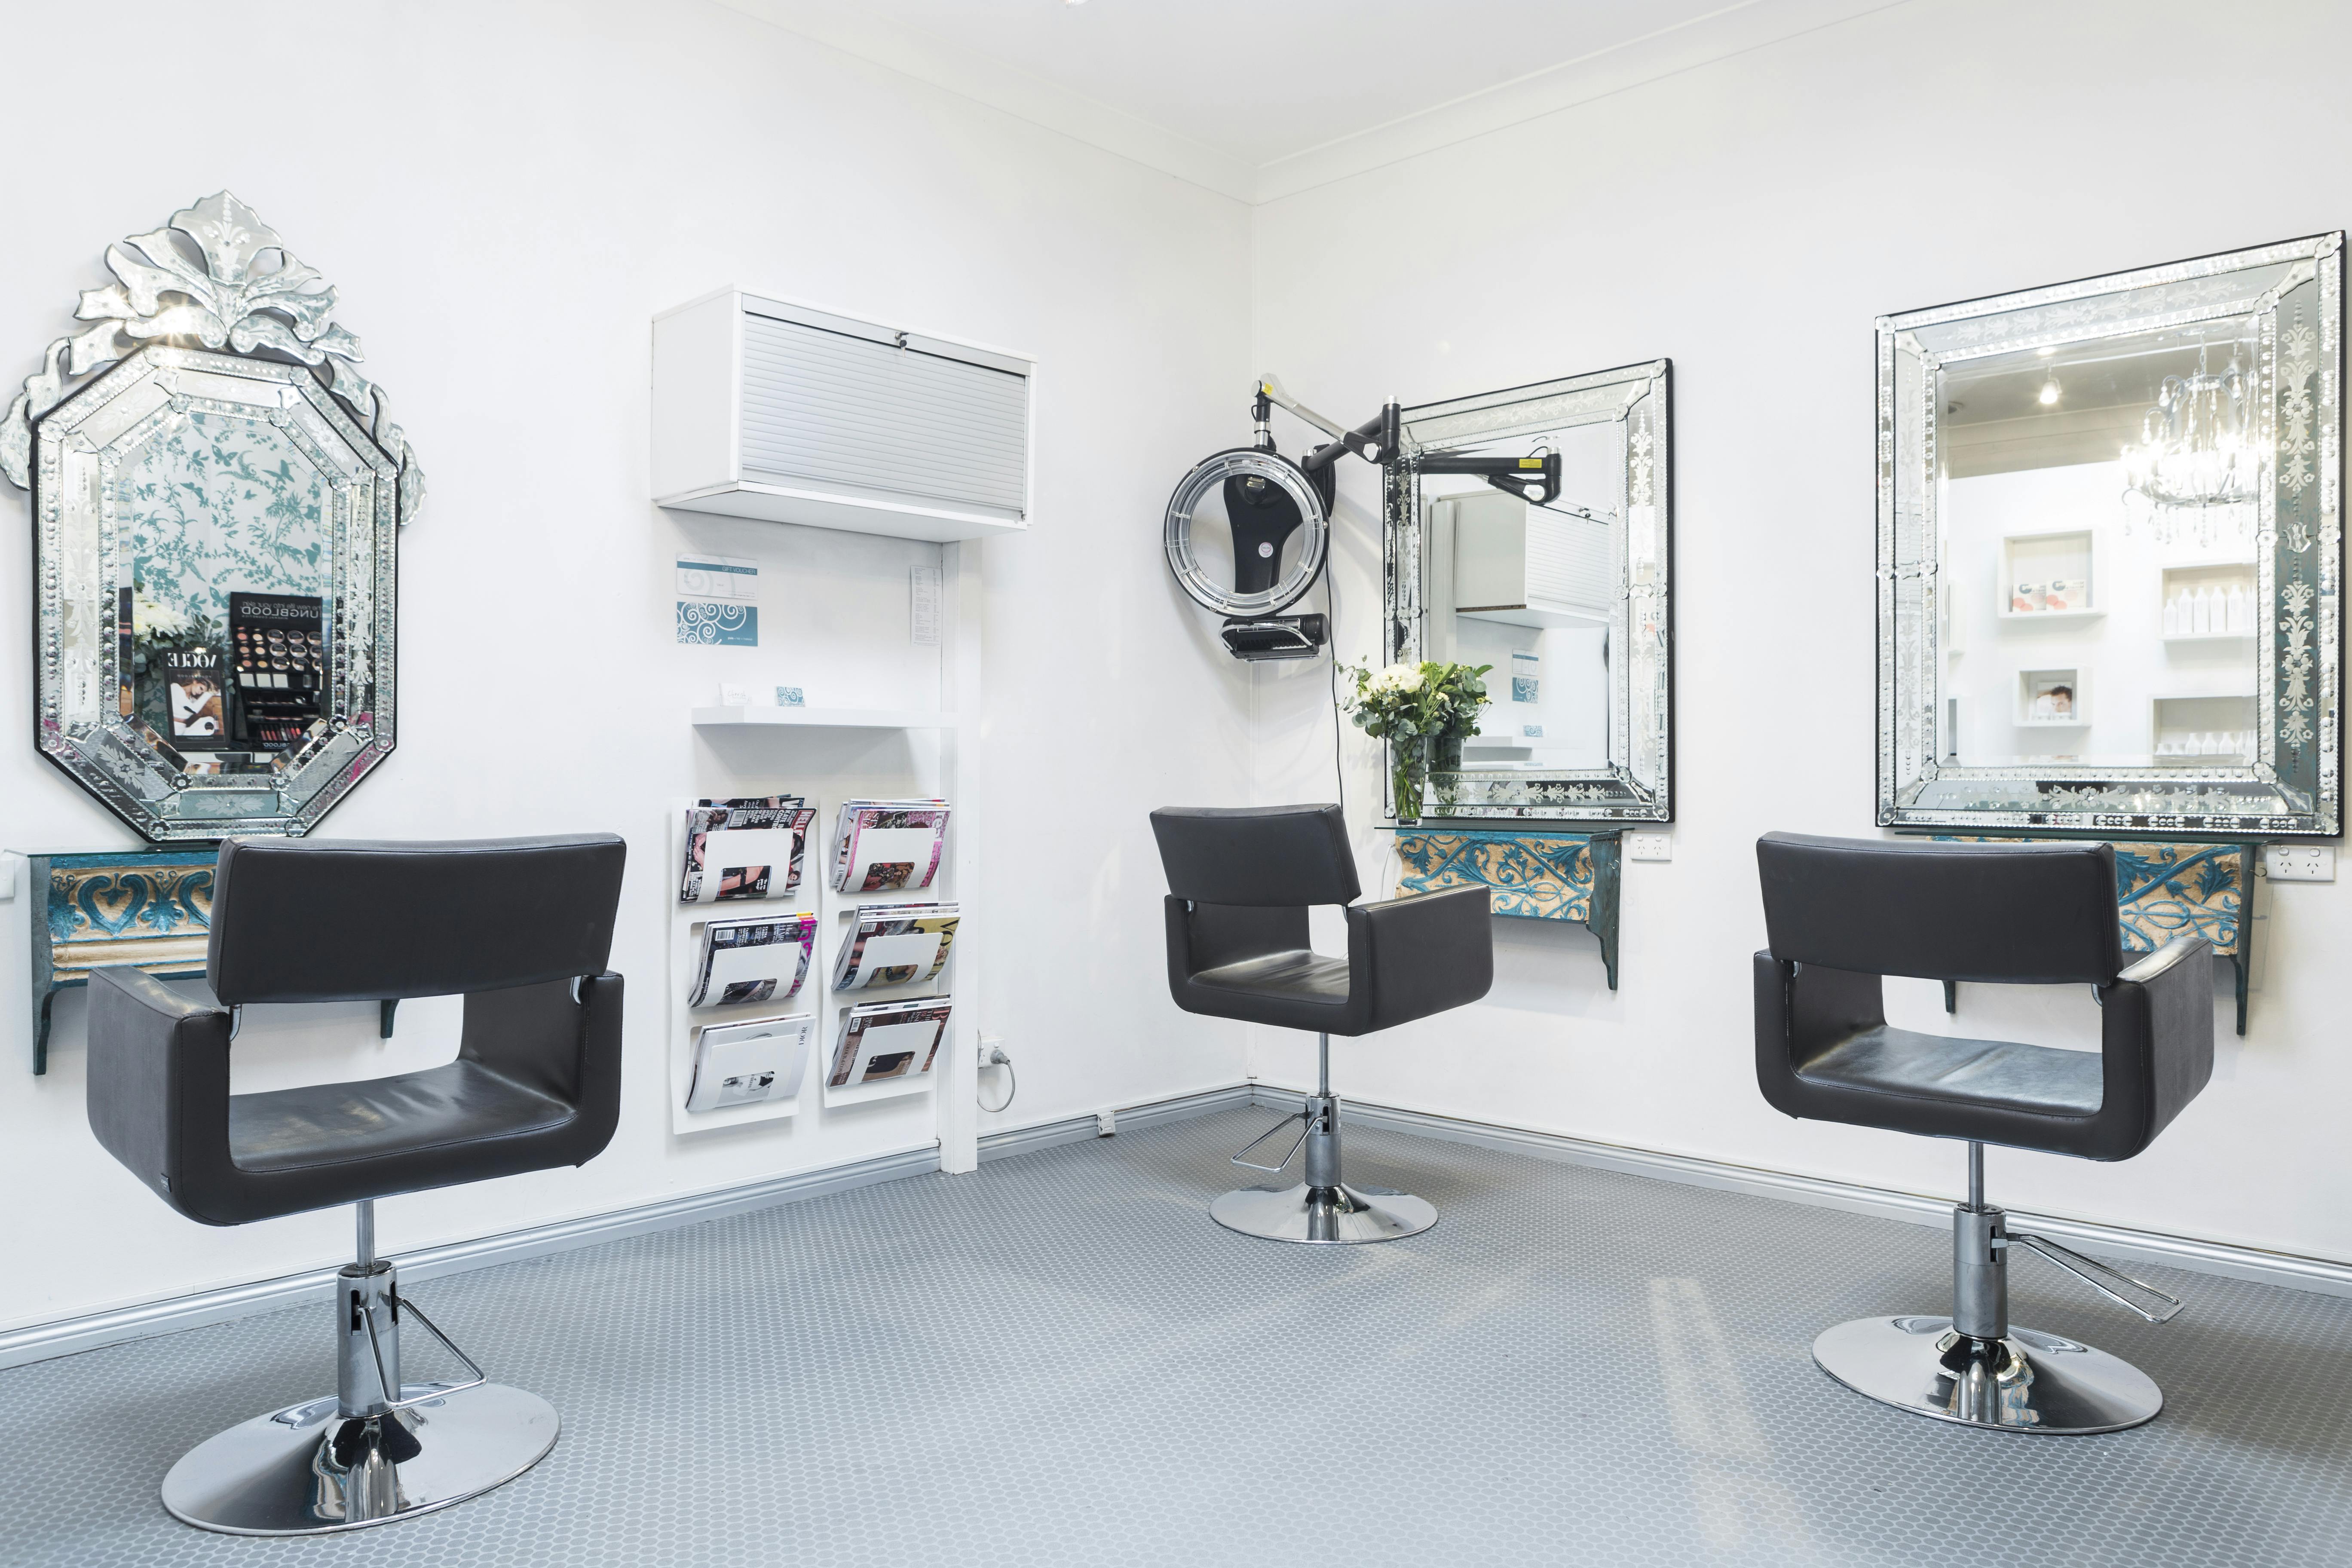 Top 20 Hairdressers in Sydney | Bookwell